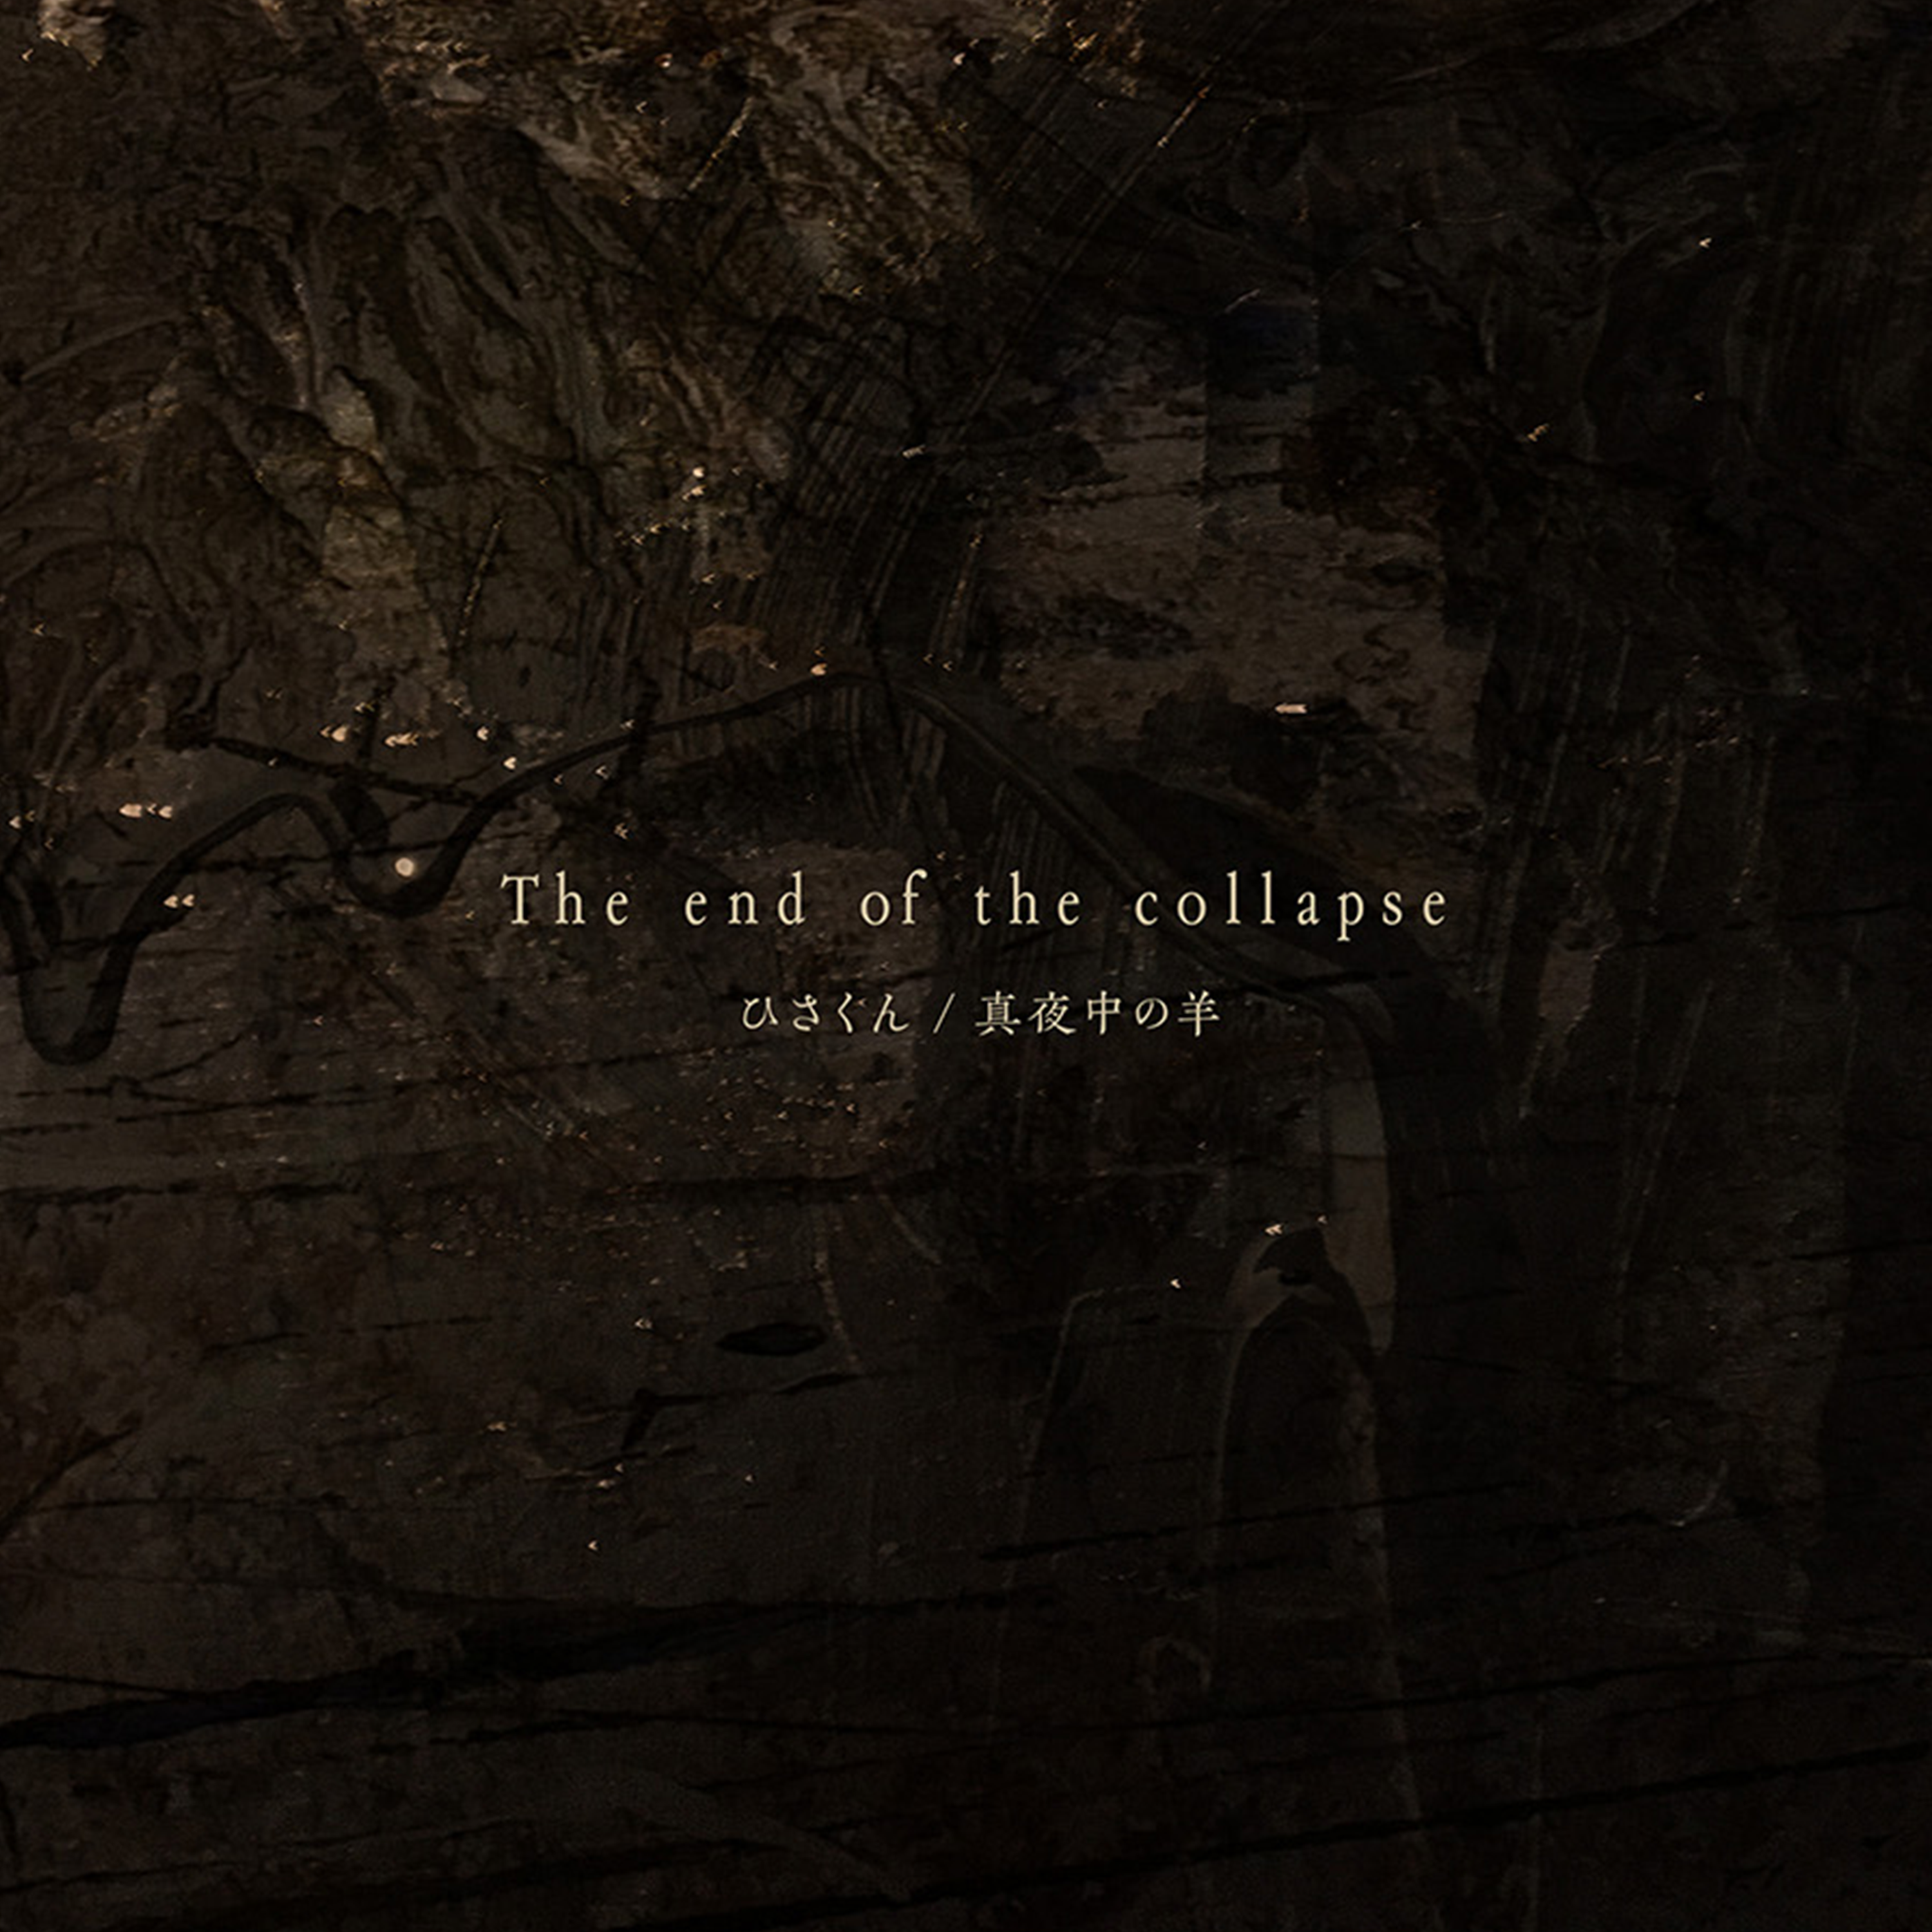 The end of the collapse shop